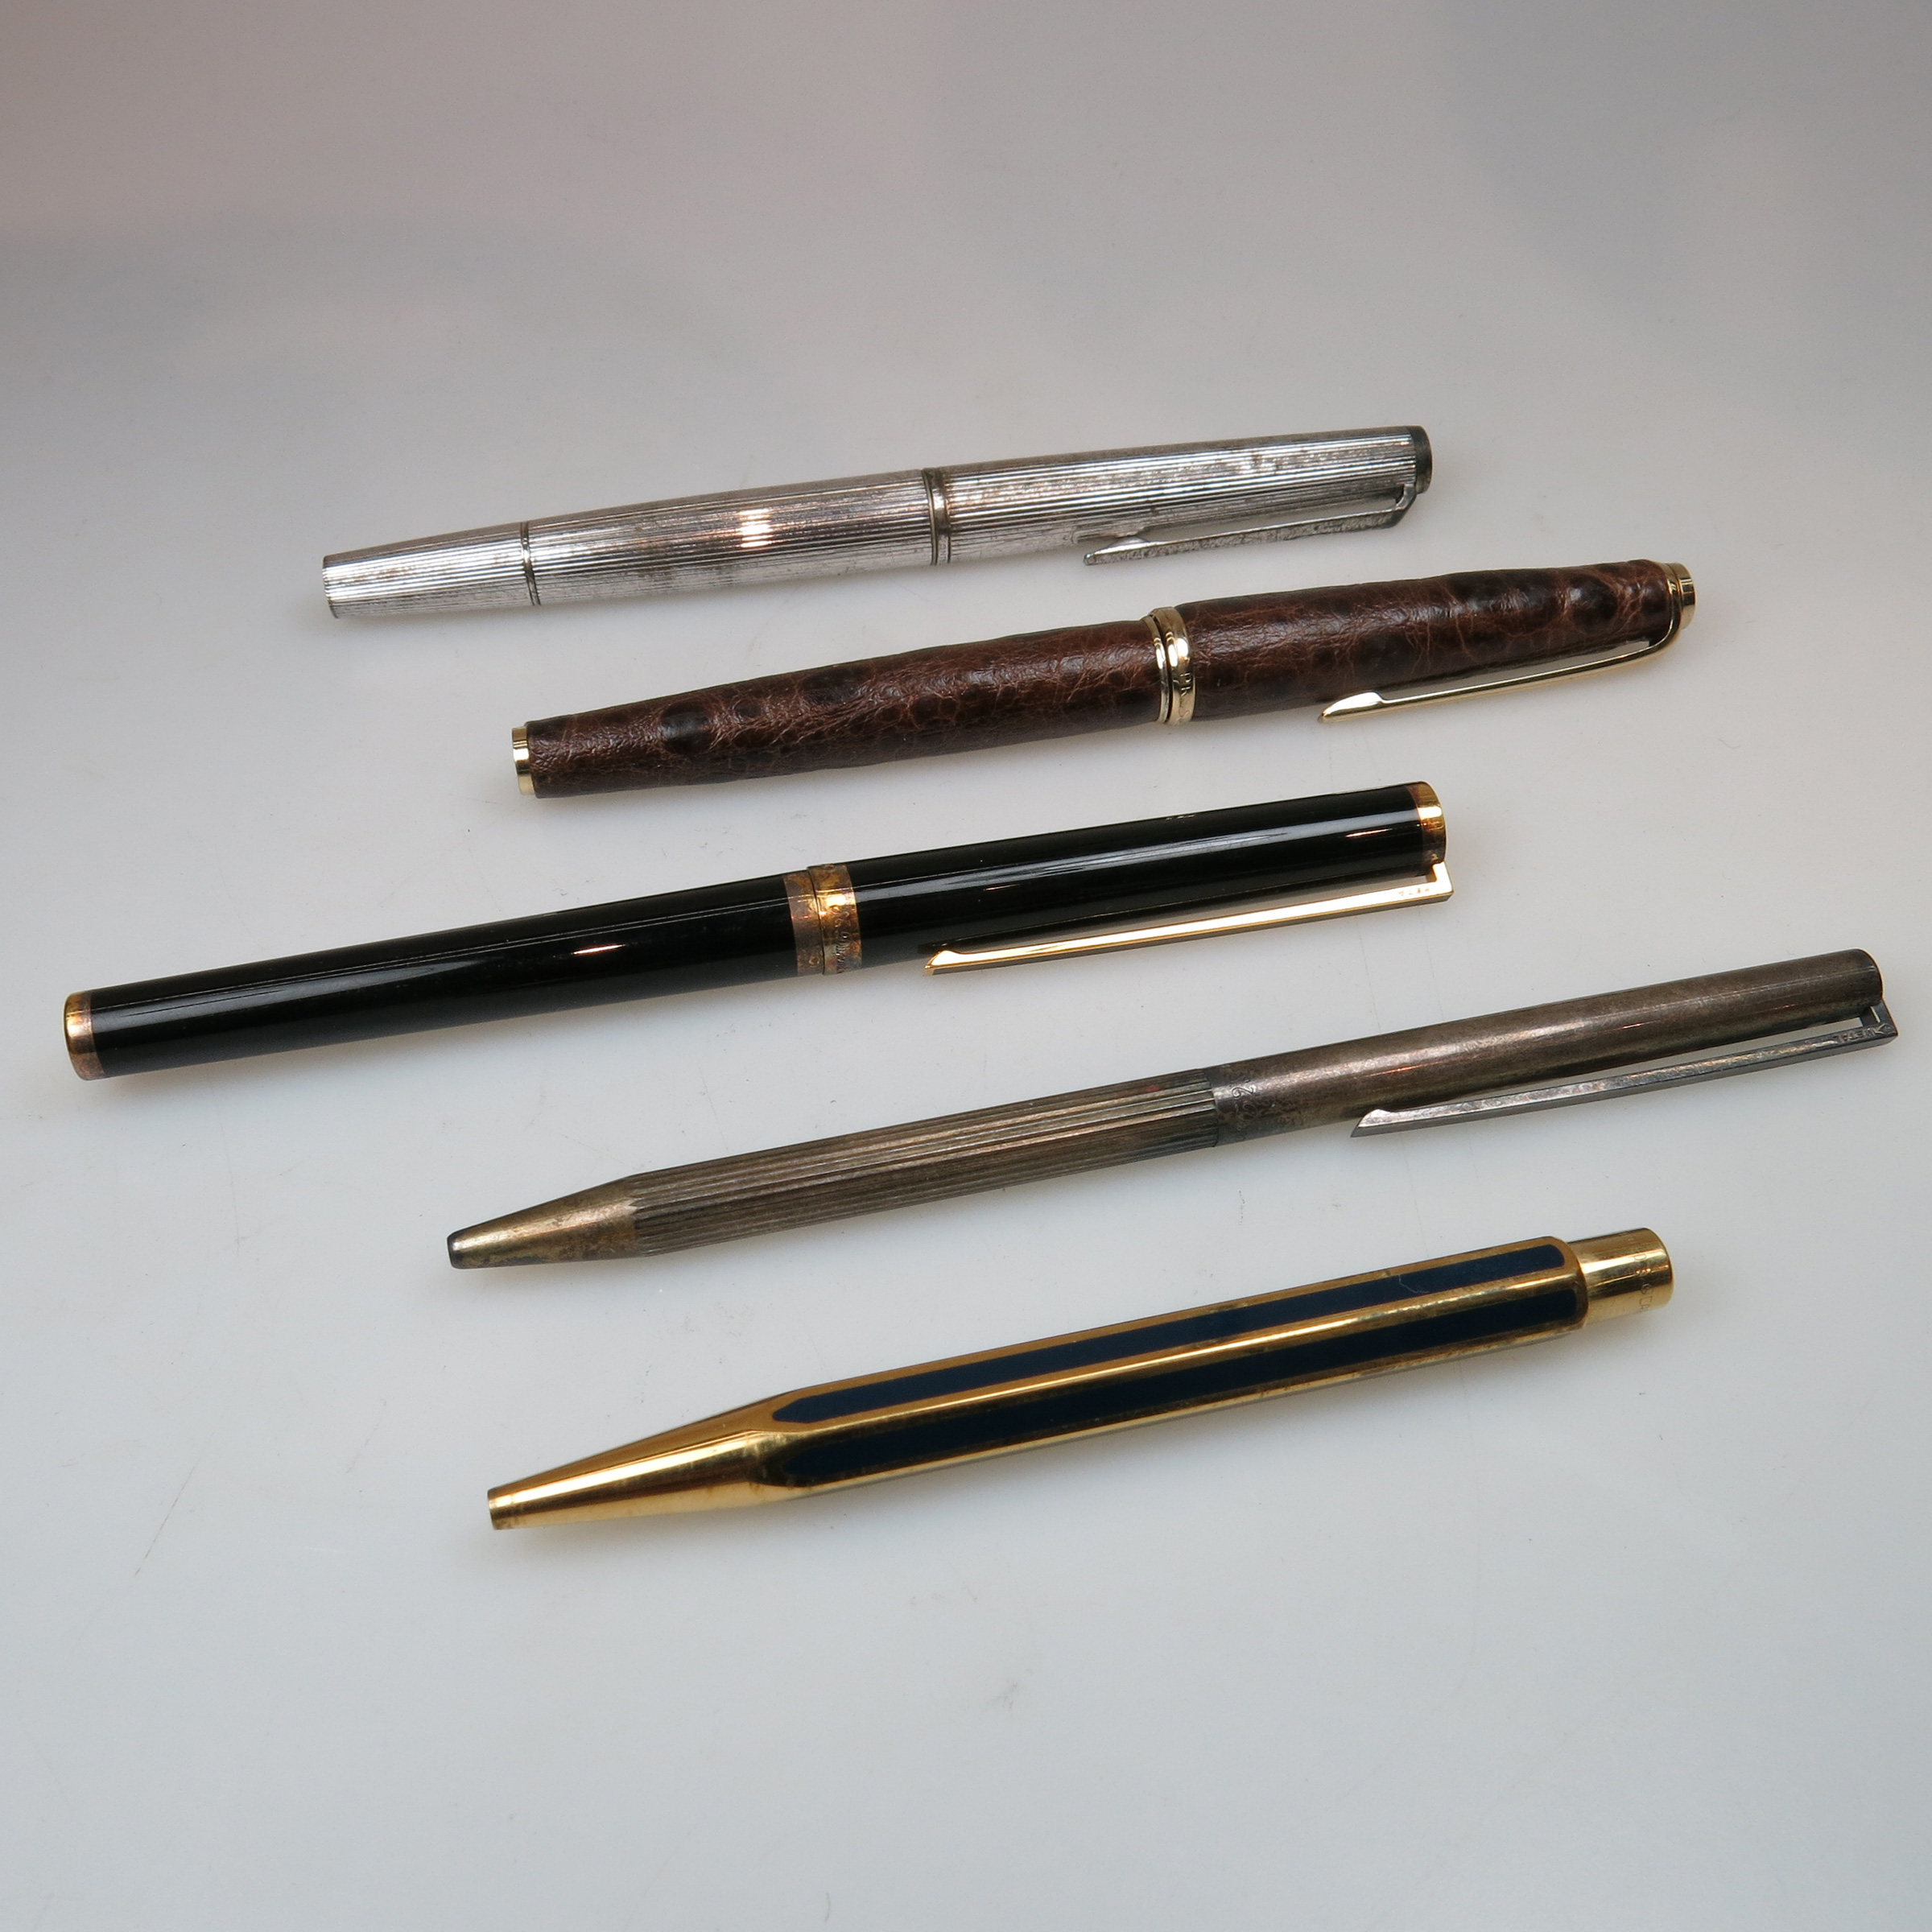 3 Fountain Pens And 2 Ballpoint Pens